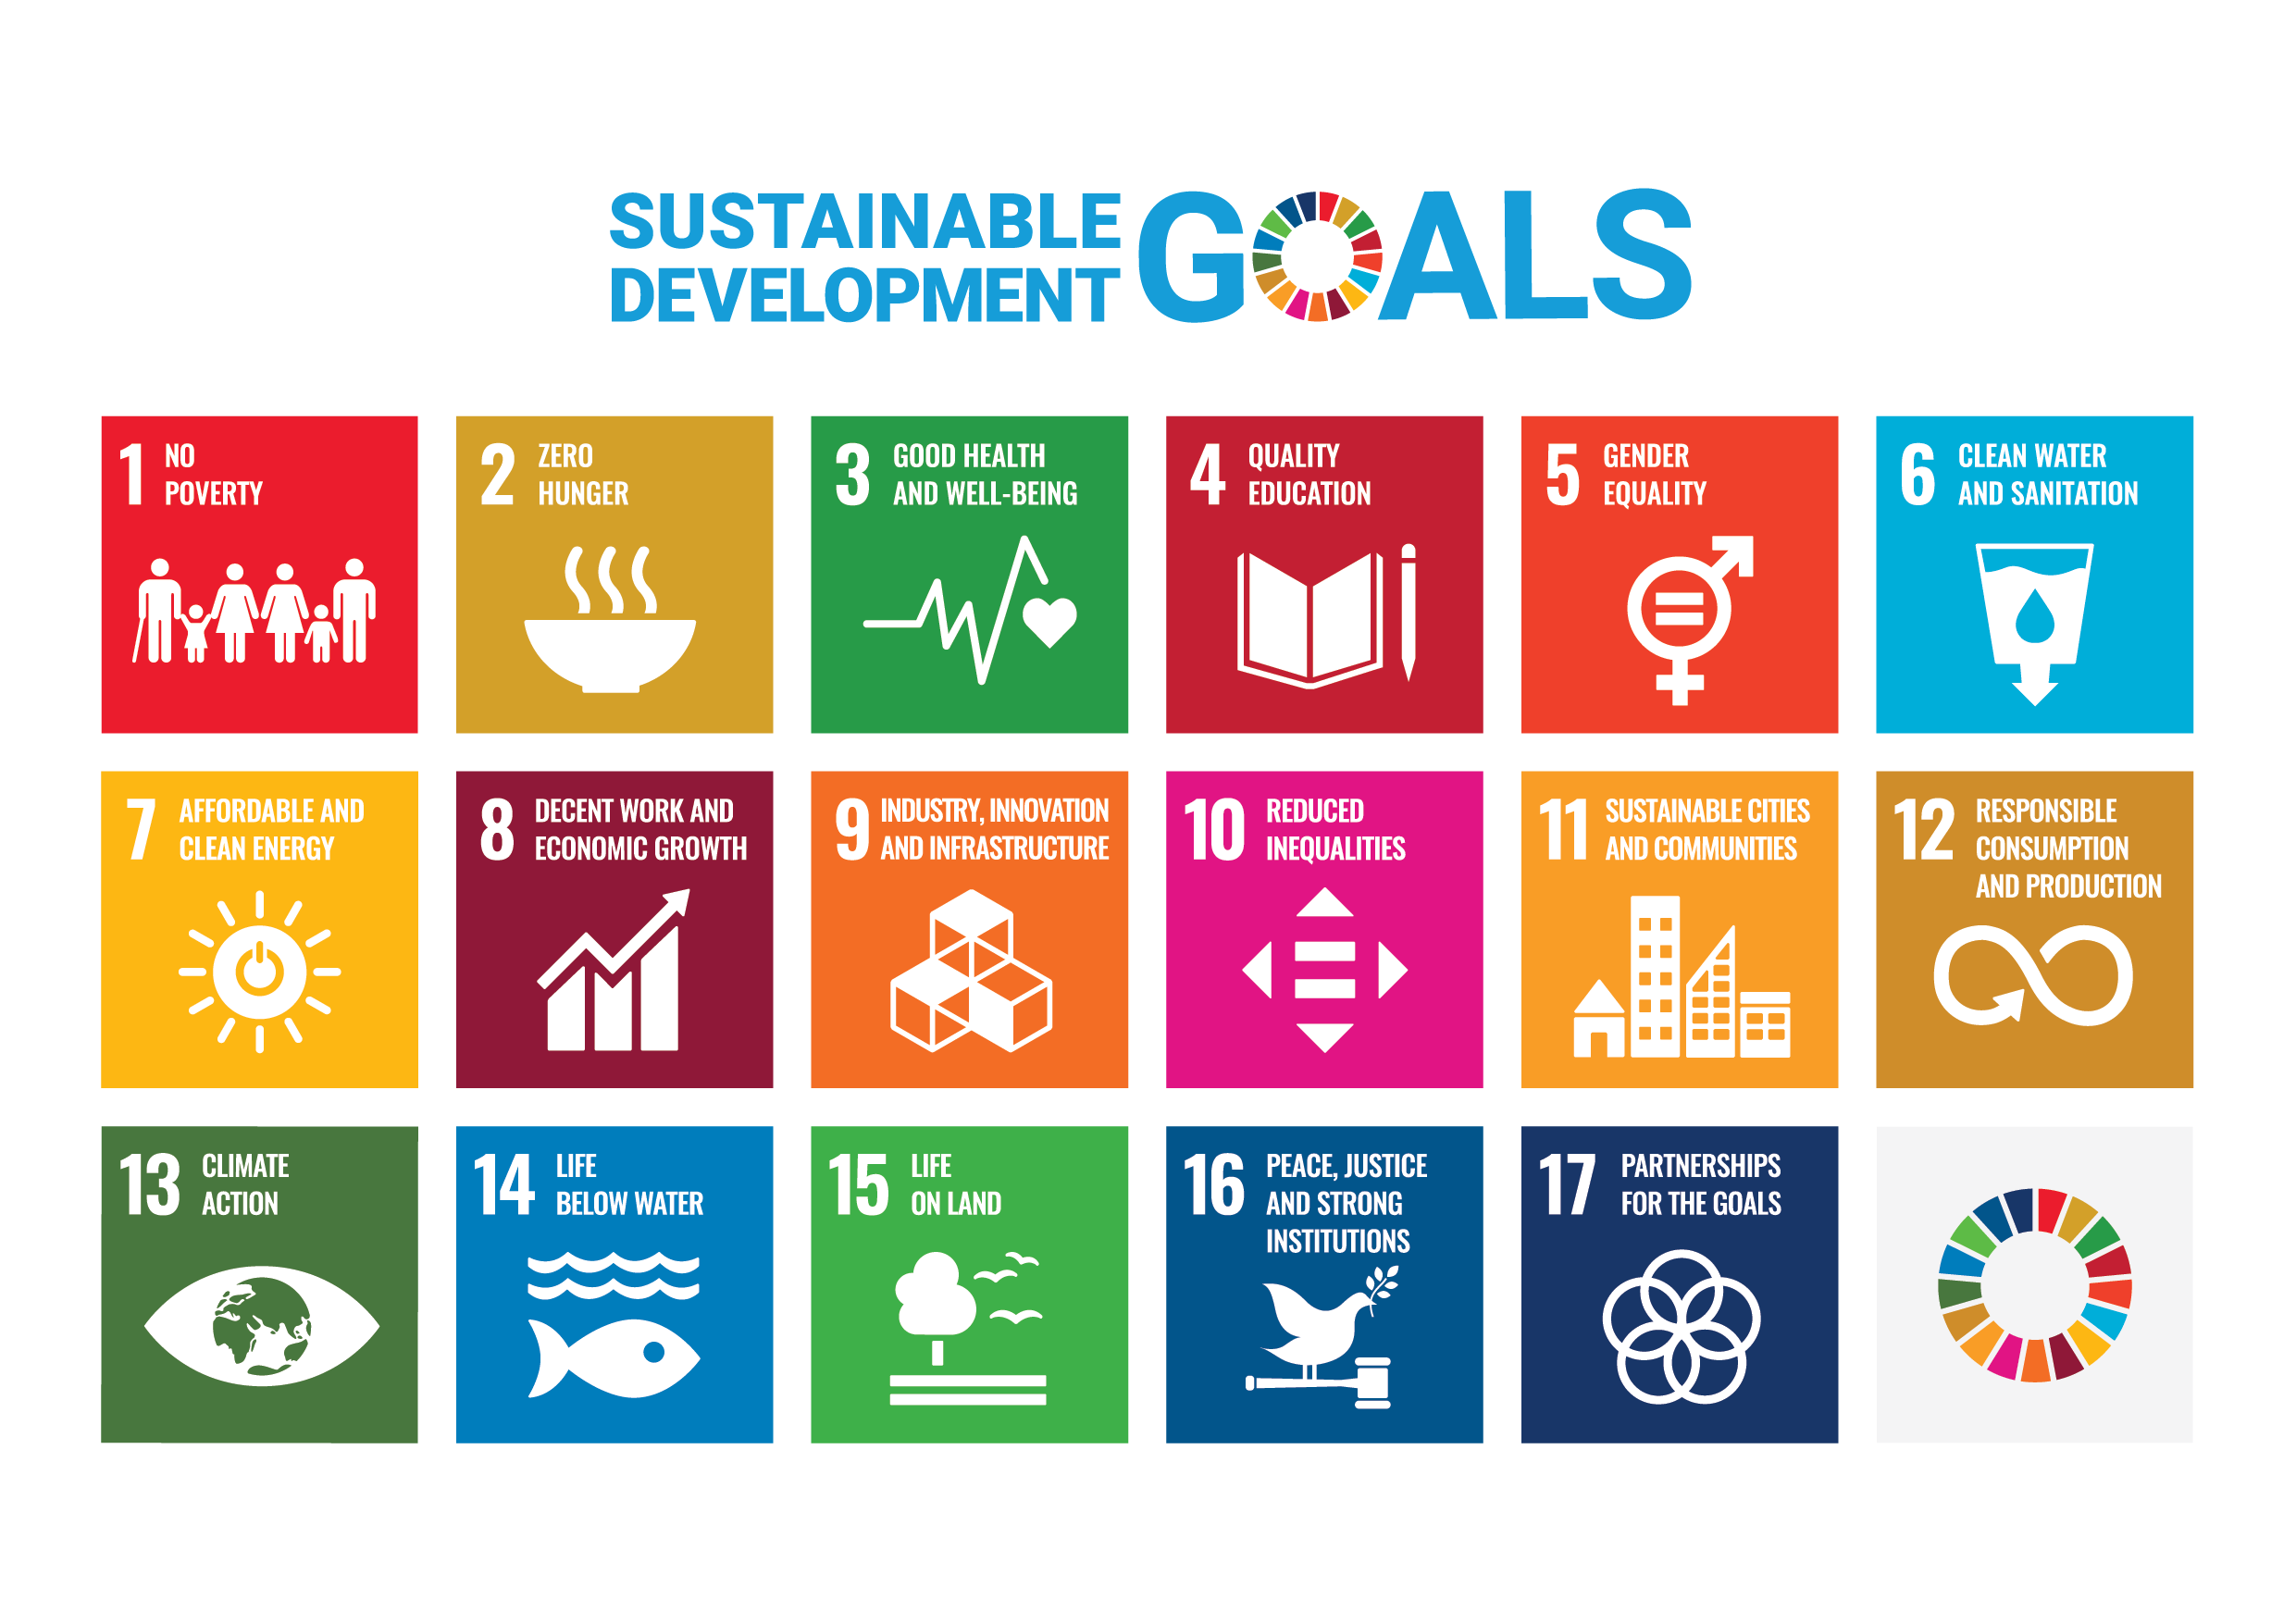 The Sustainable Development Goals (SDGs) logo, including the colour wheel and 17 icons